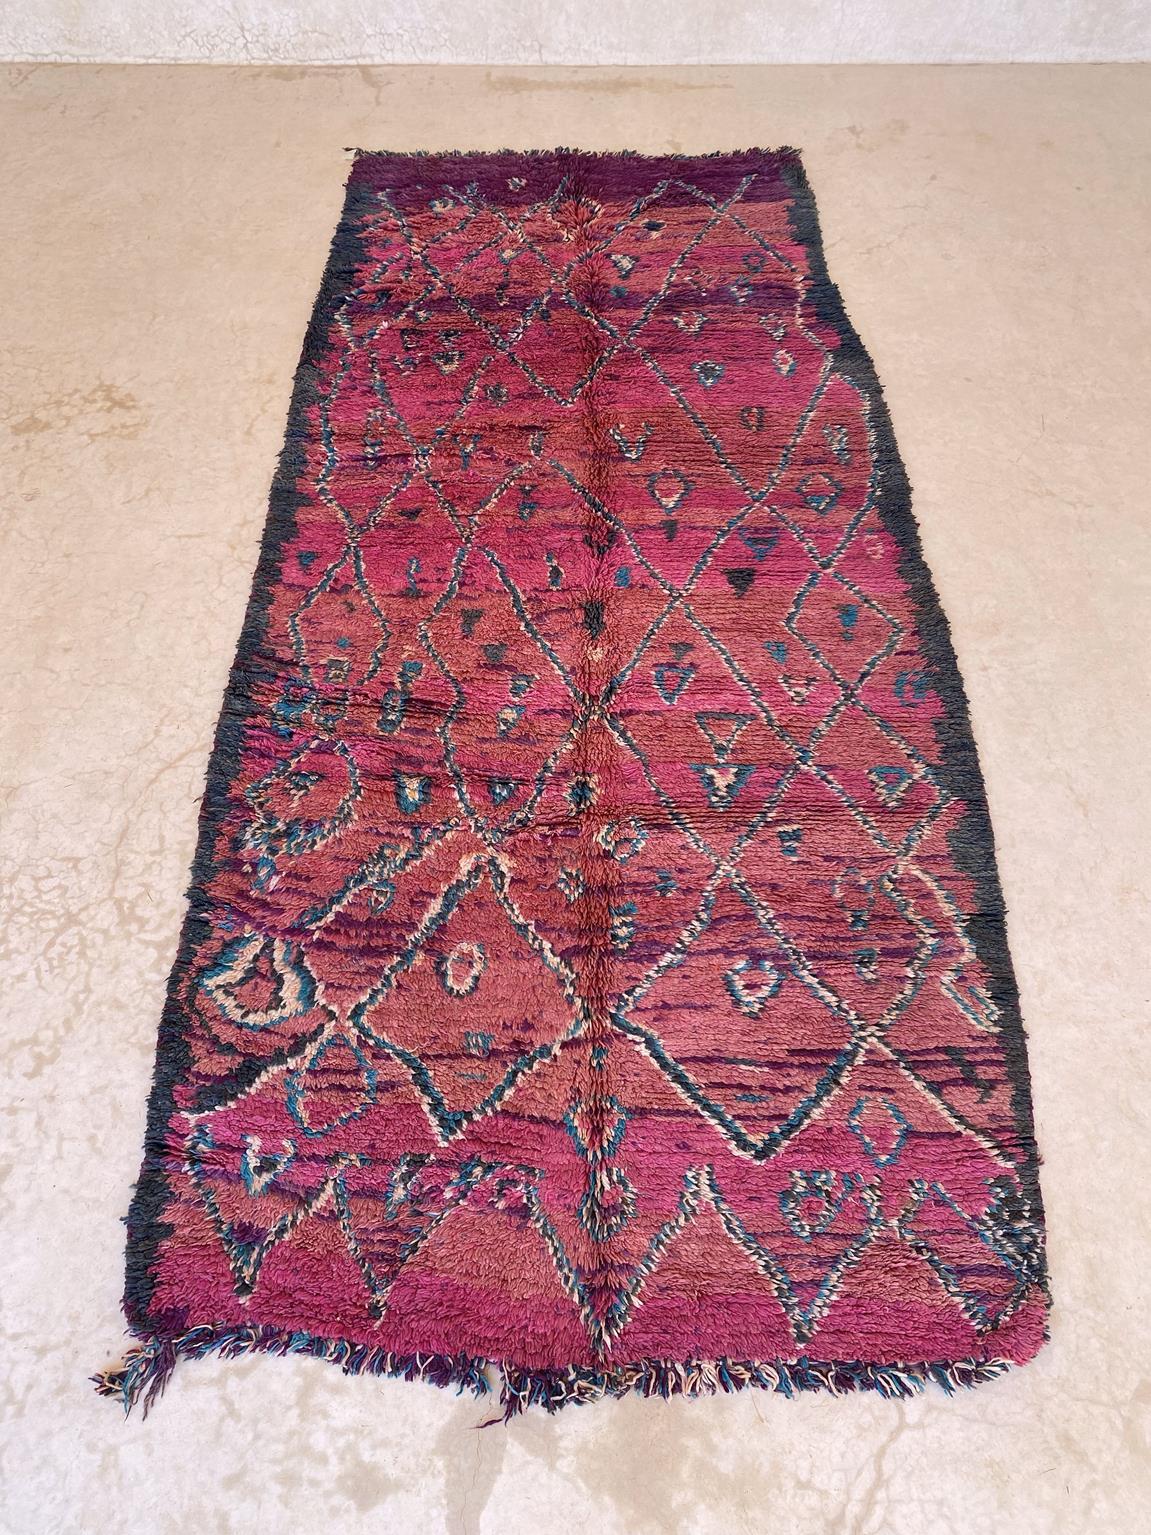 Here is one very beautiful, unique vintage rug, probably from the Talsint tribe. The colors are so fresh, from a fuchsia to a warm purple with gray, white and emerald green designs, unregular lines with tiny diamonds and triangles. It shows very